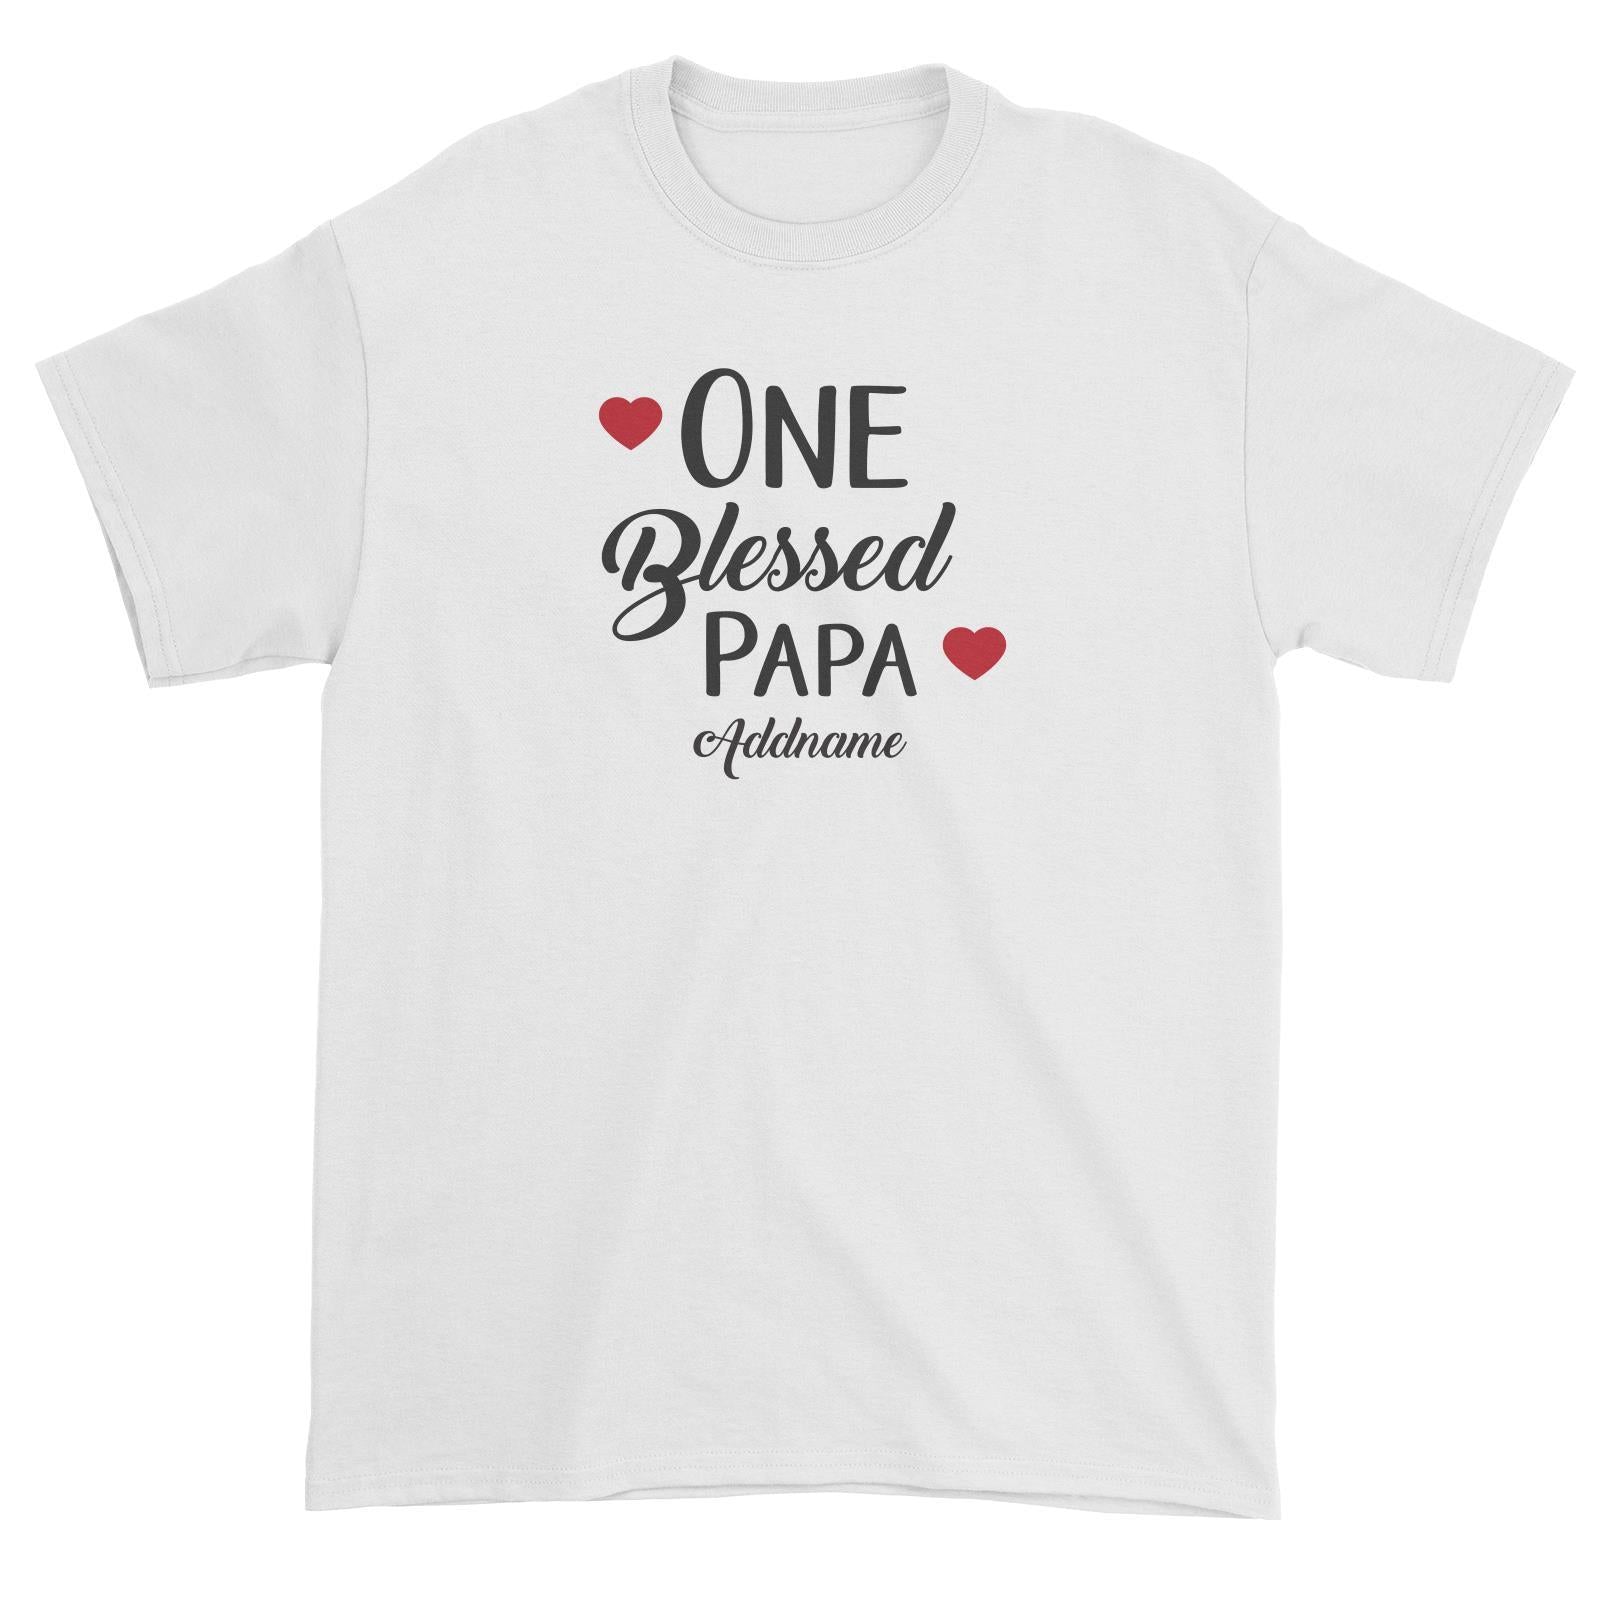 Christian Series One Blessed Papa Addname Unisex T-Shirt